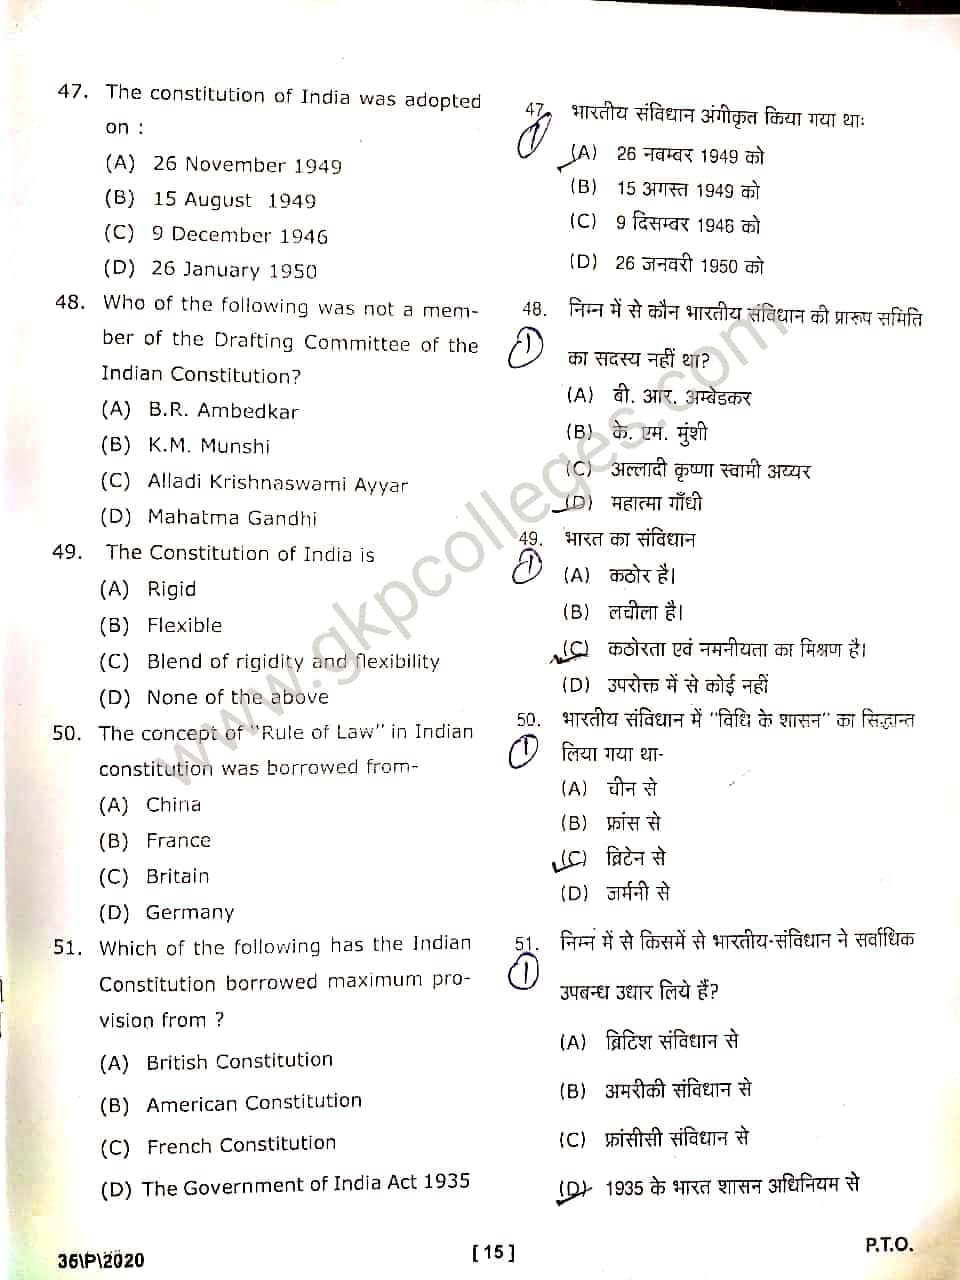 DDU M.A. Political Science Entrance question paper 2020 with Answer key